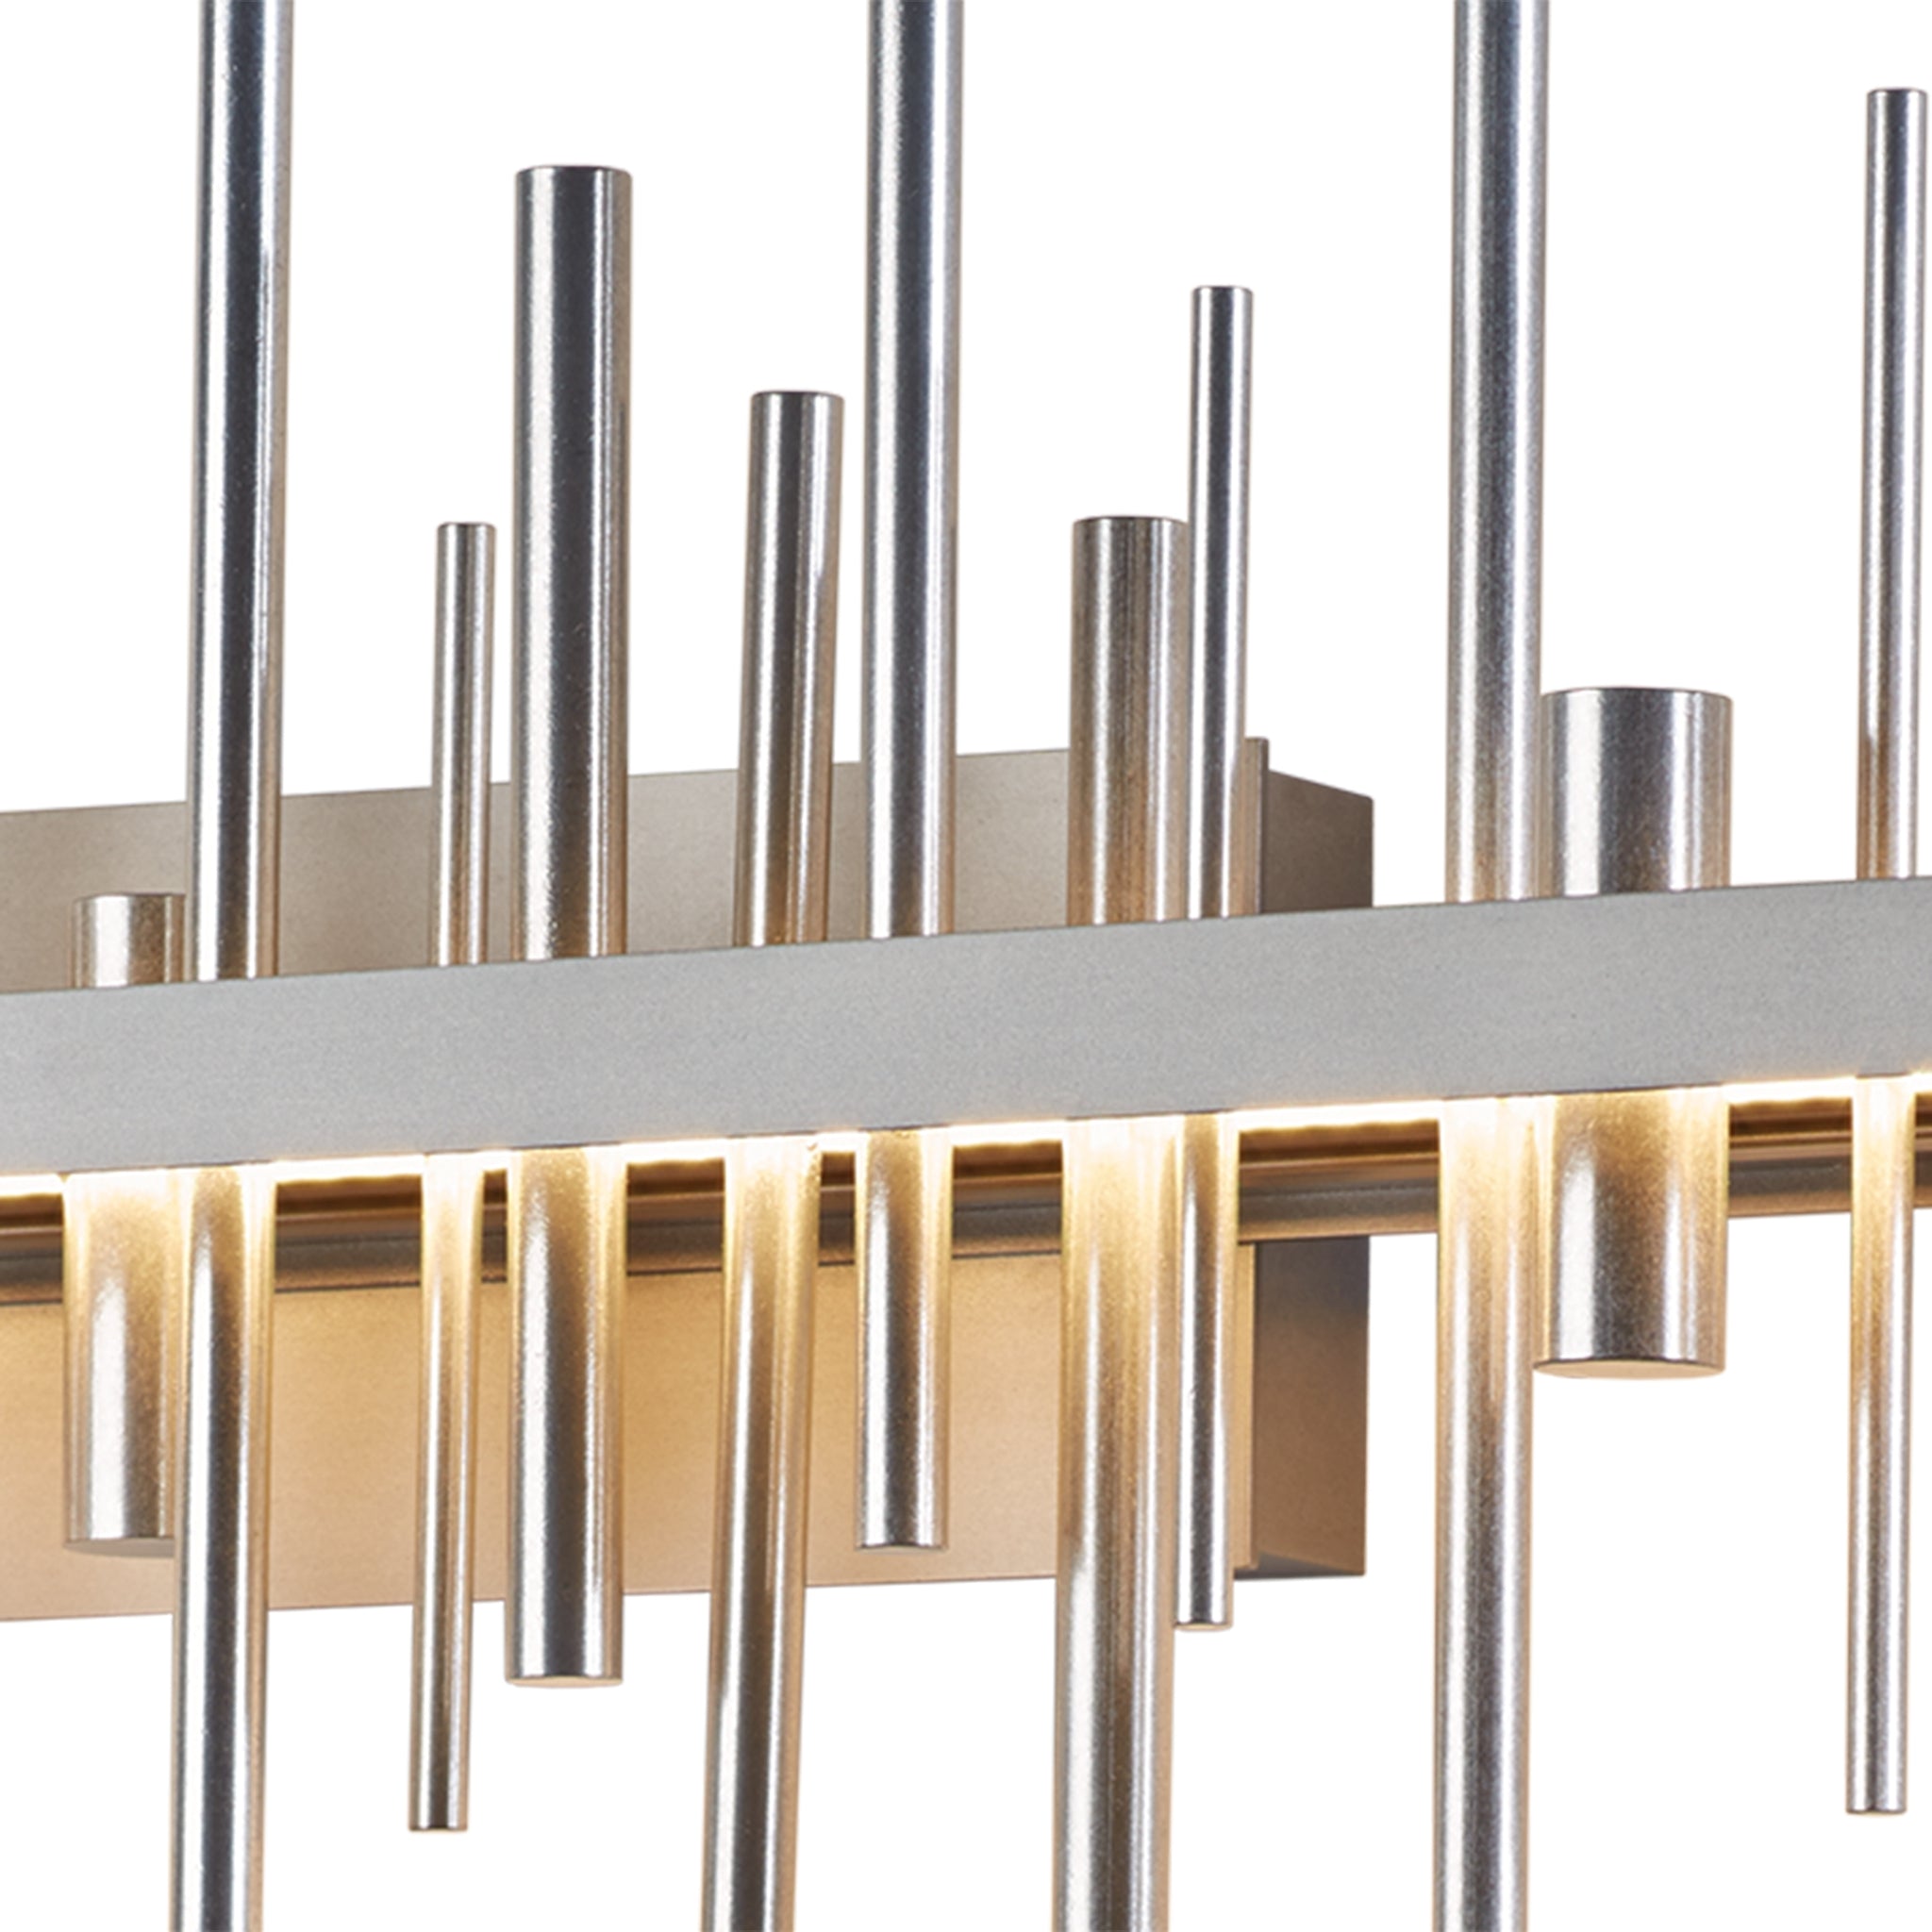 Cityscape Sconce Burnished Steel (08)